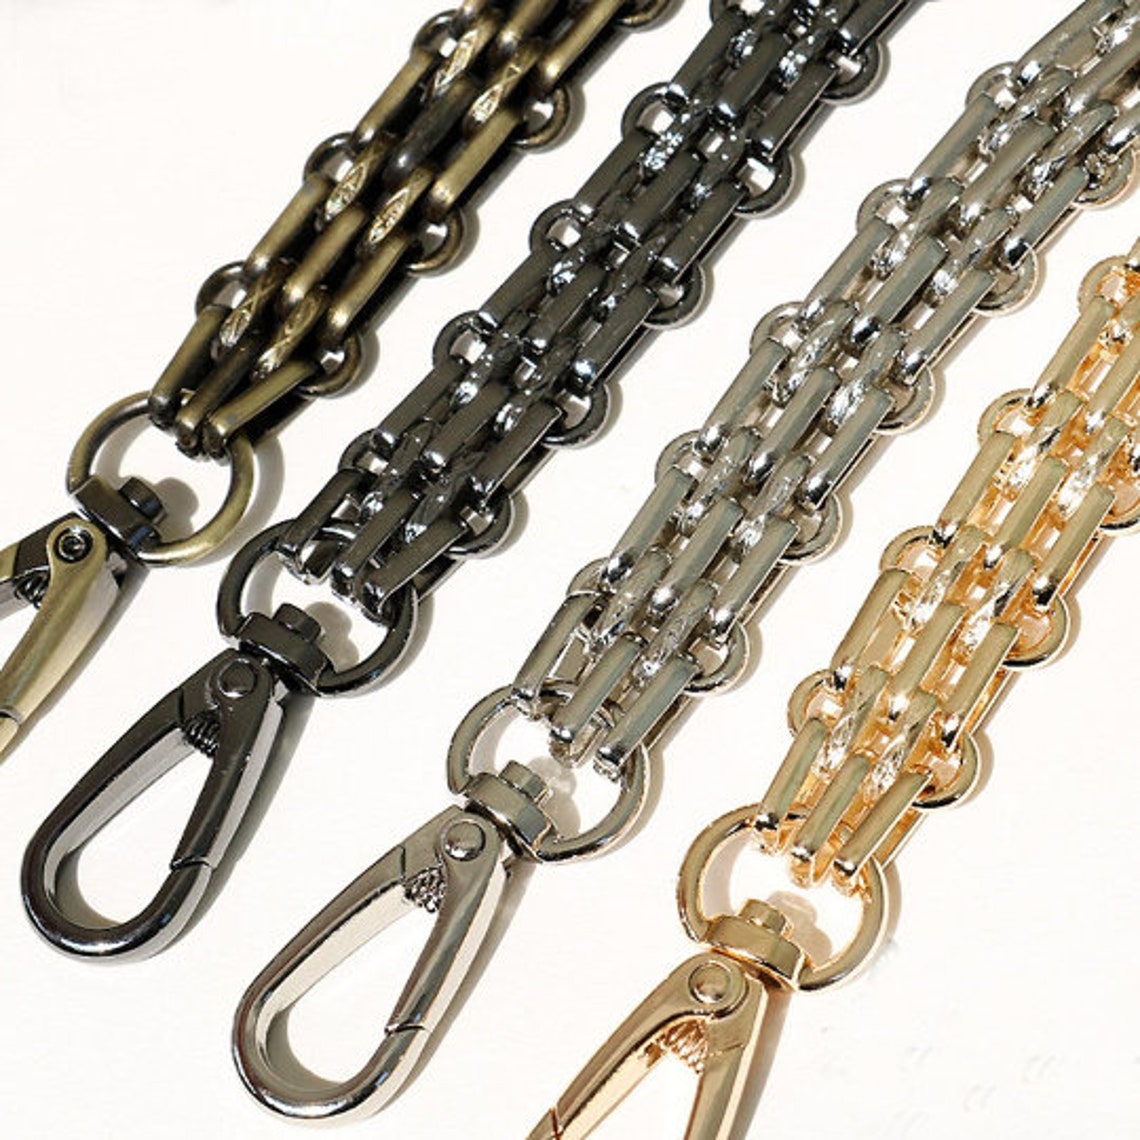 16mm Metal Thick Purse Chain Strap Bag Handle Chain - Etsy